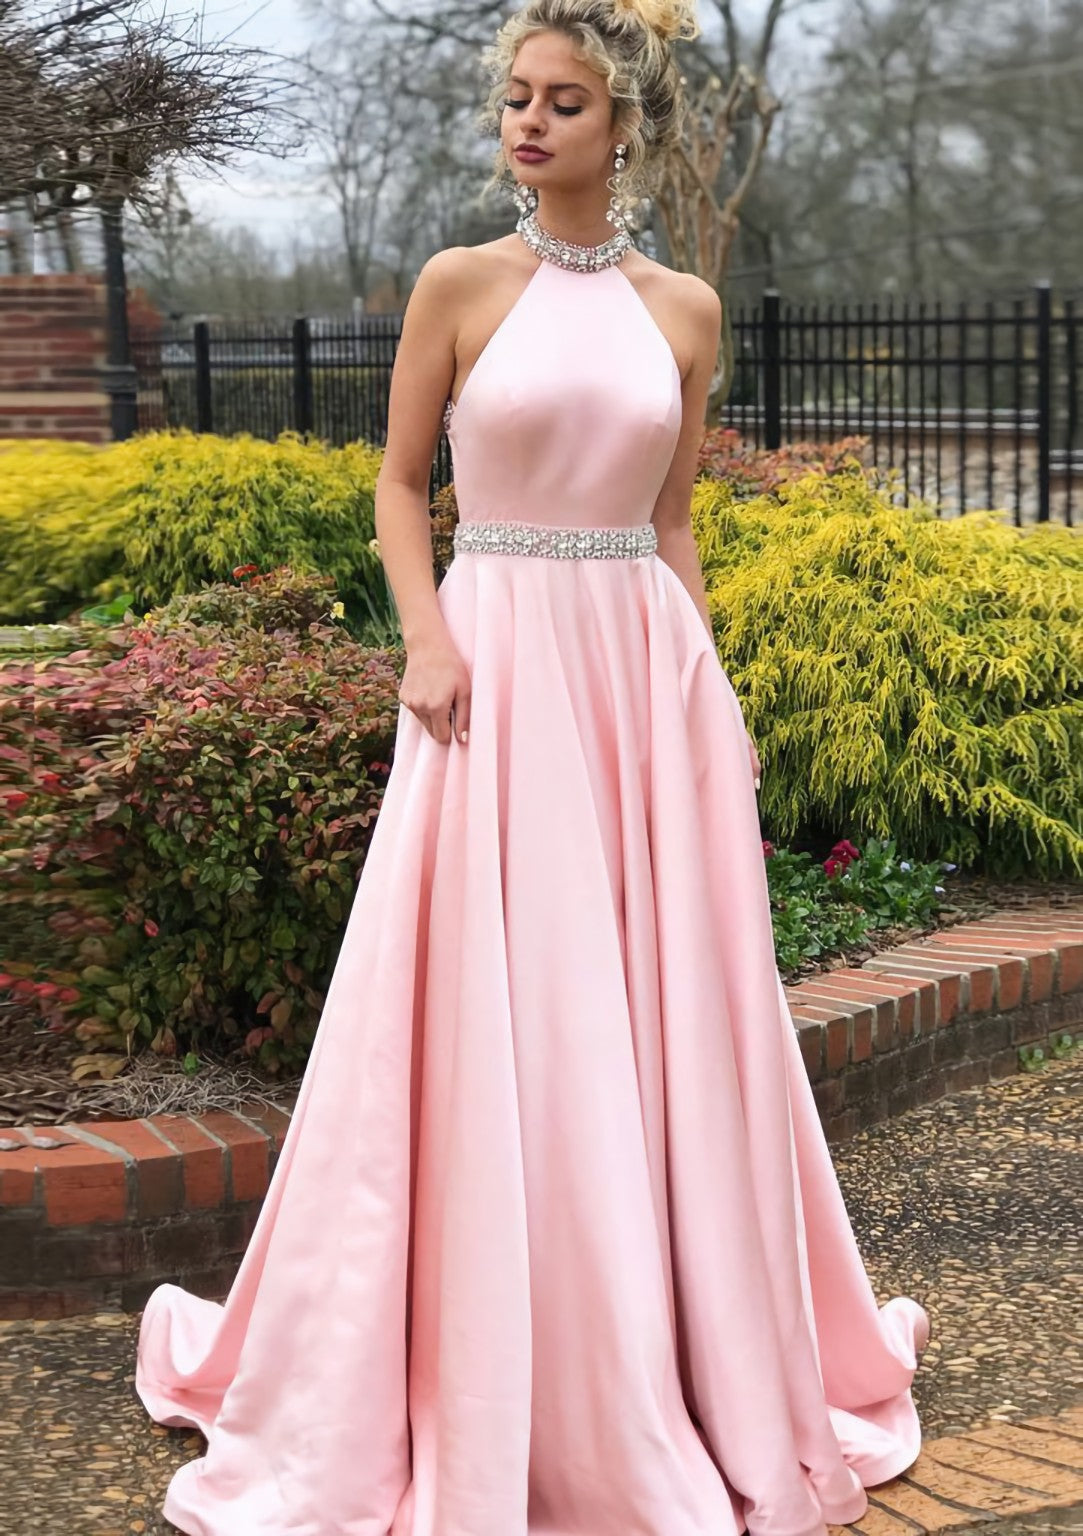 Party Dresses Style, A-line/Princess High-Neck Sleeveless Sweep Train Satin Prom Dress With Waistband Beading